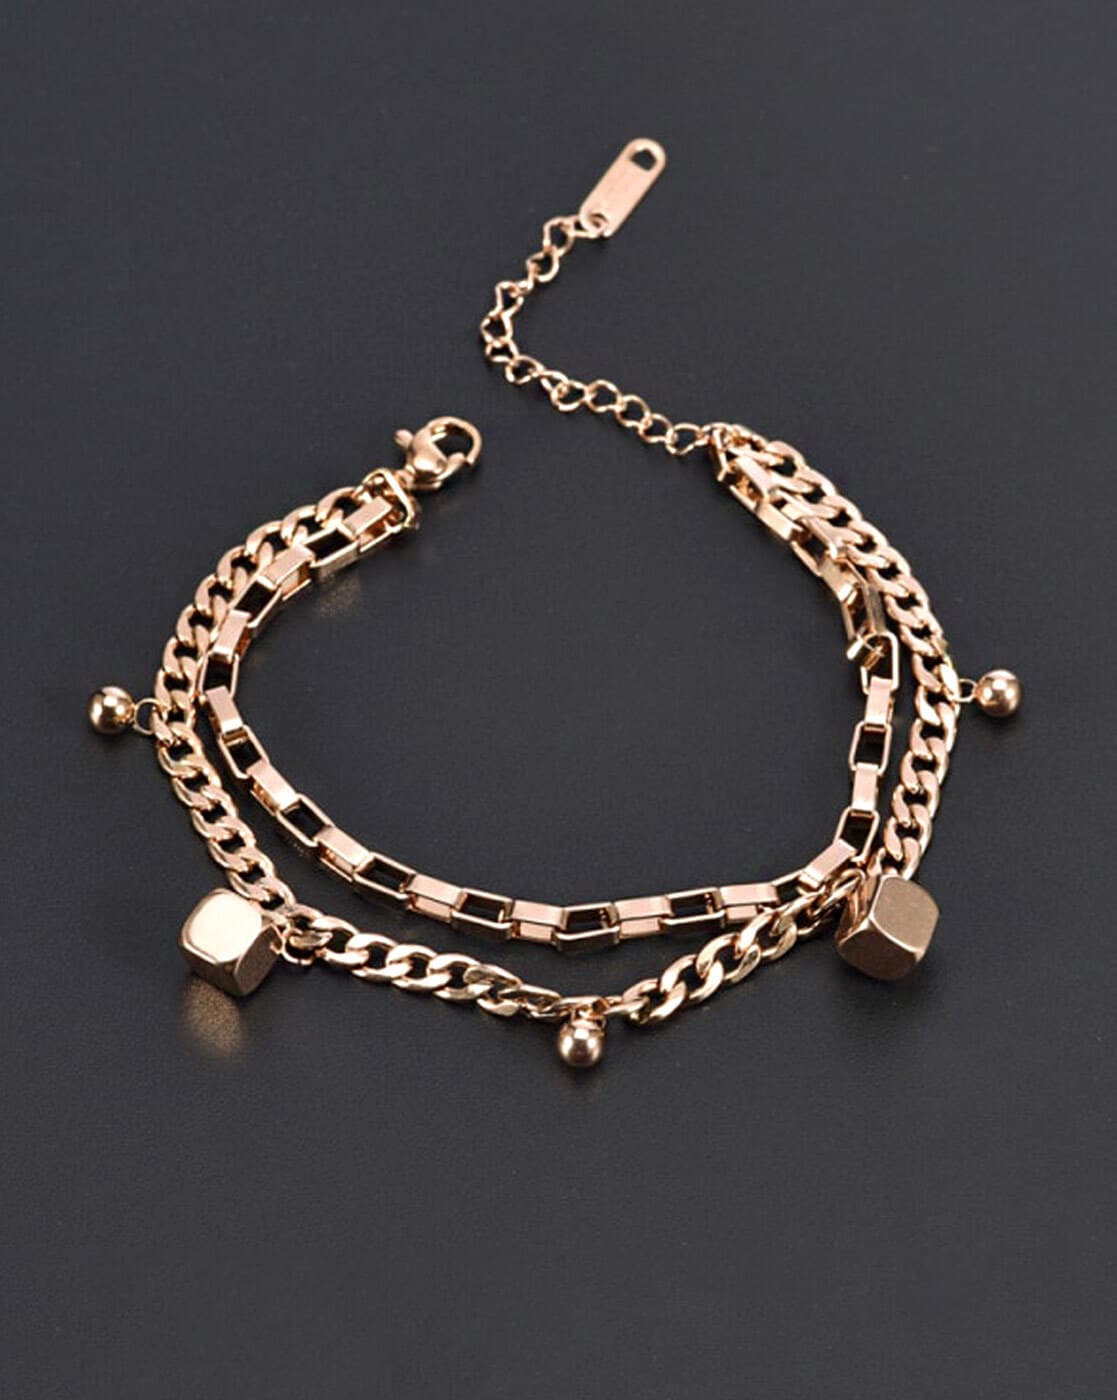 Must-Have Link Chain Bracelets for Women